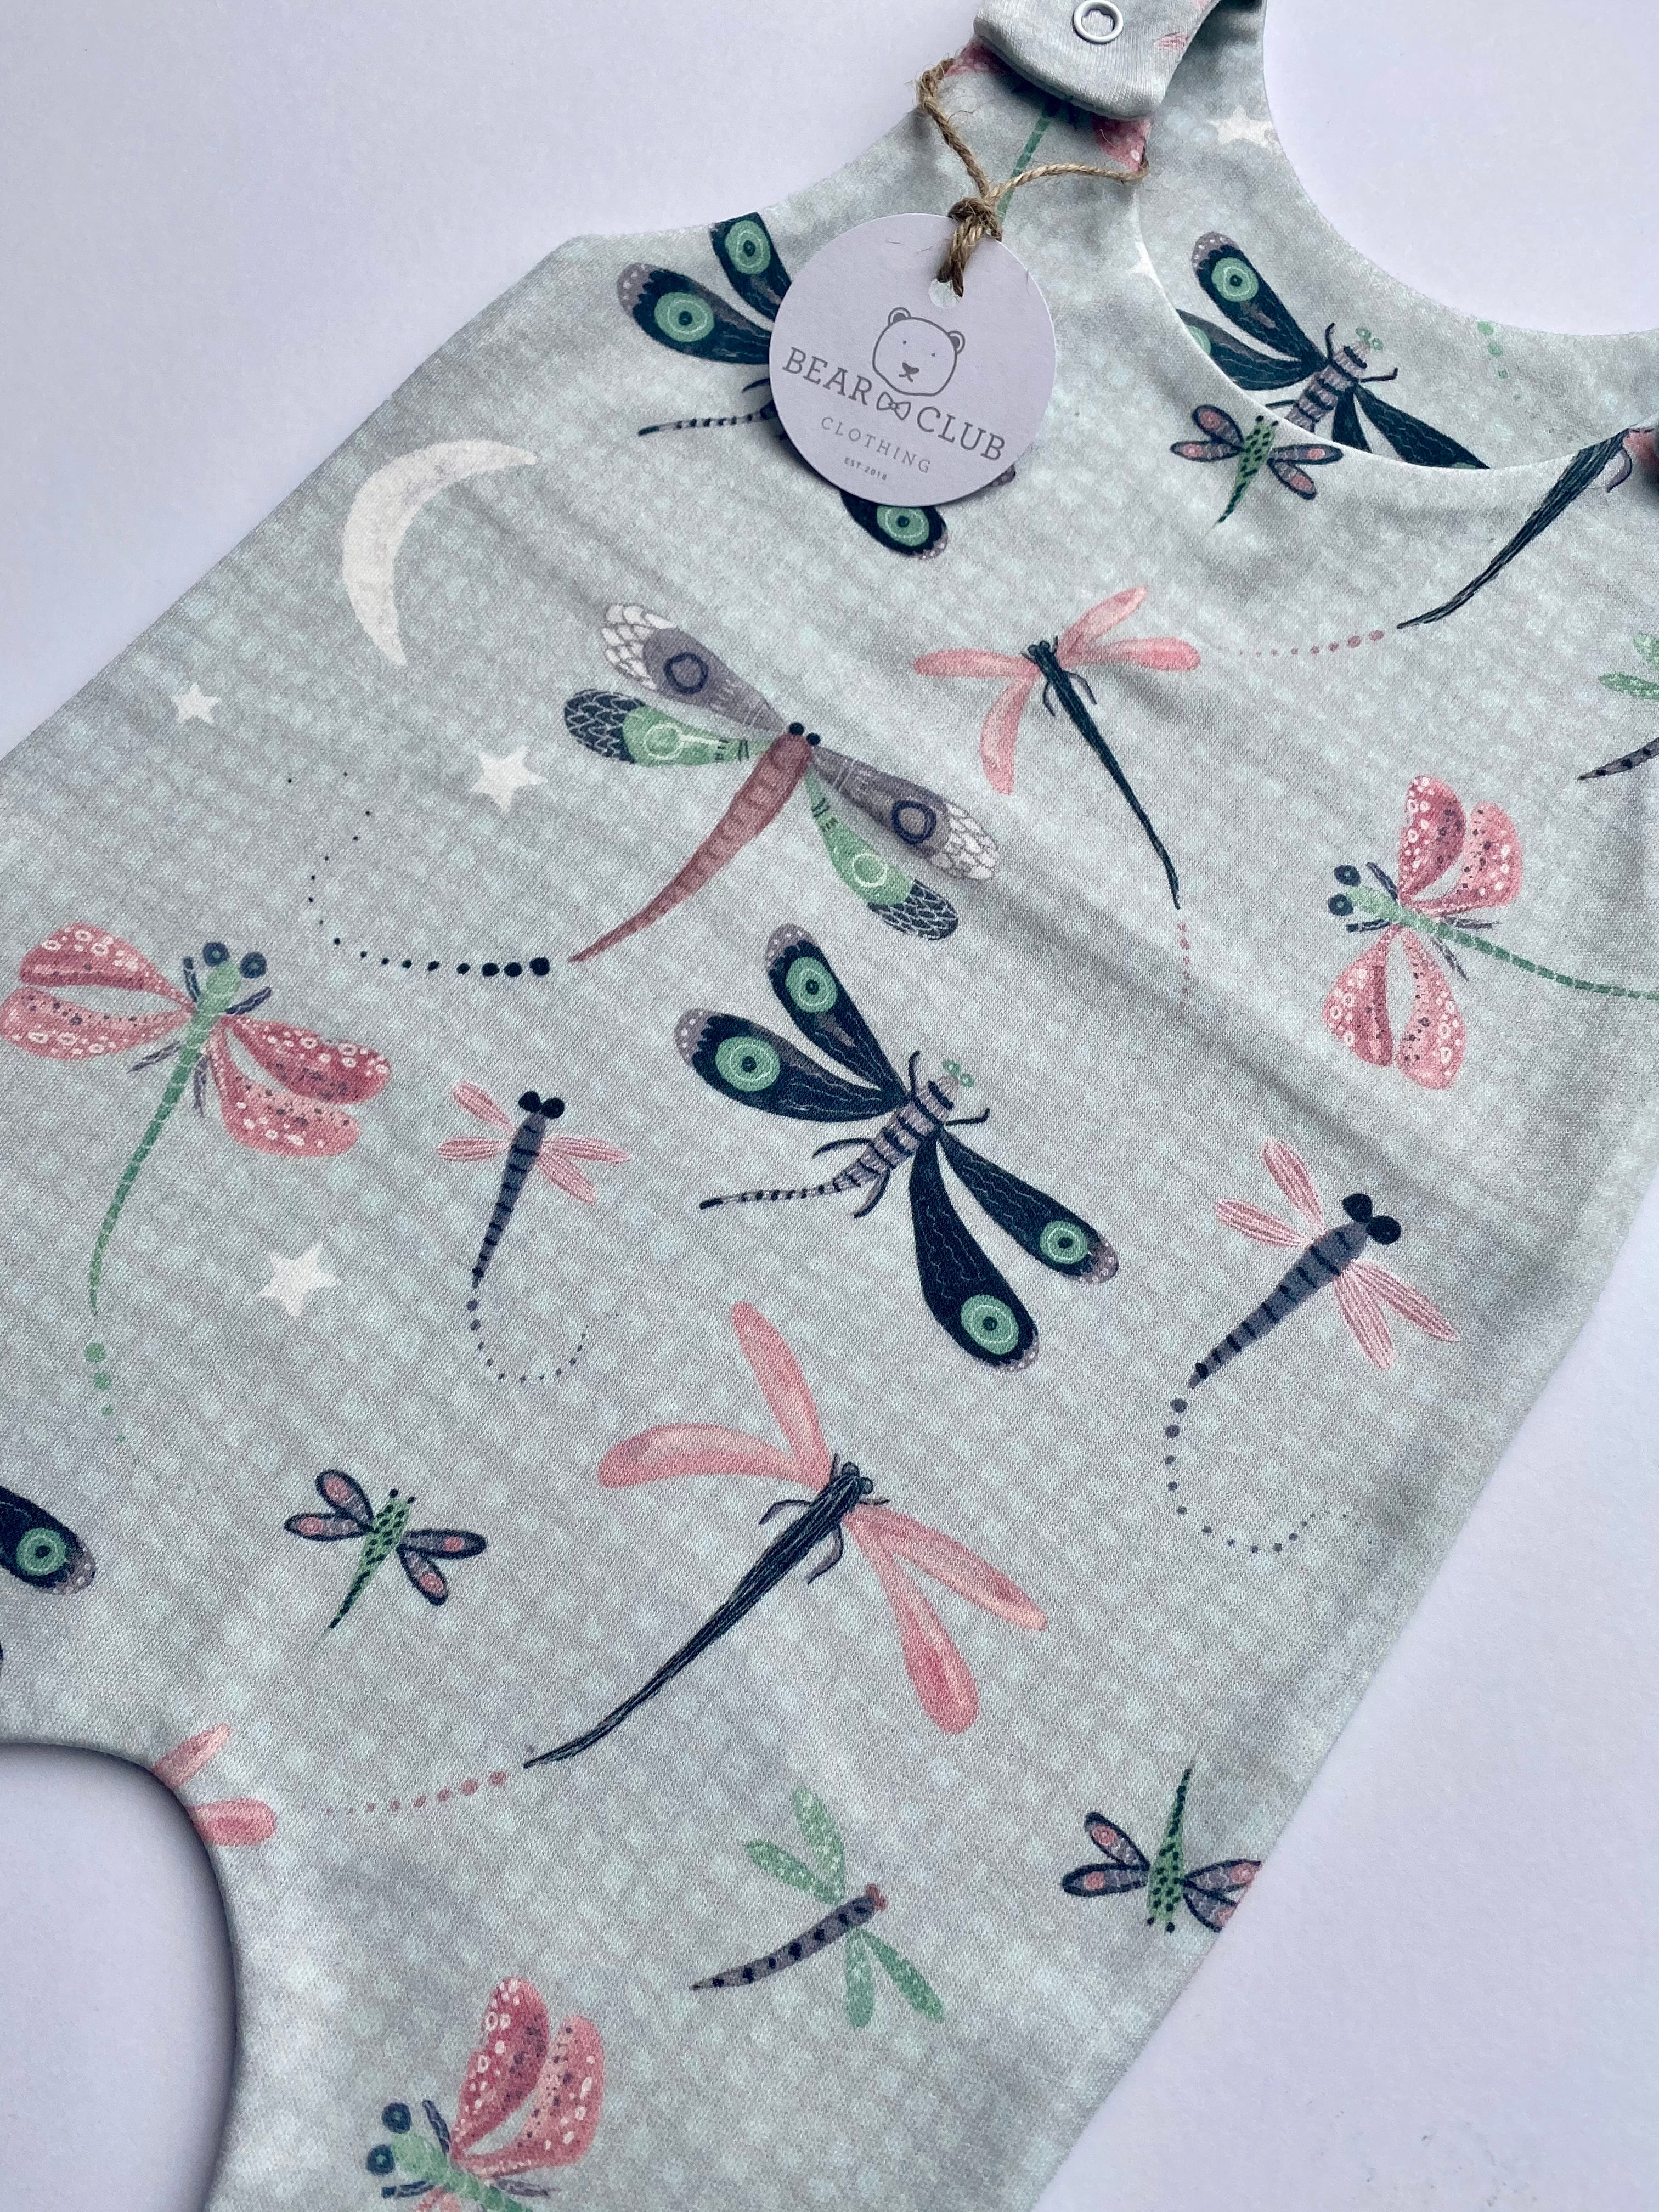 Delicate Dragonflies Footed Romper